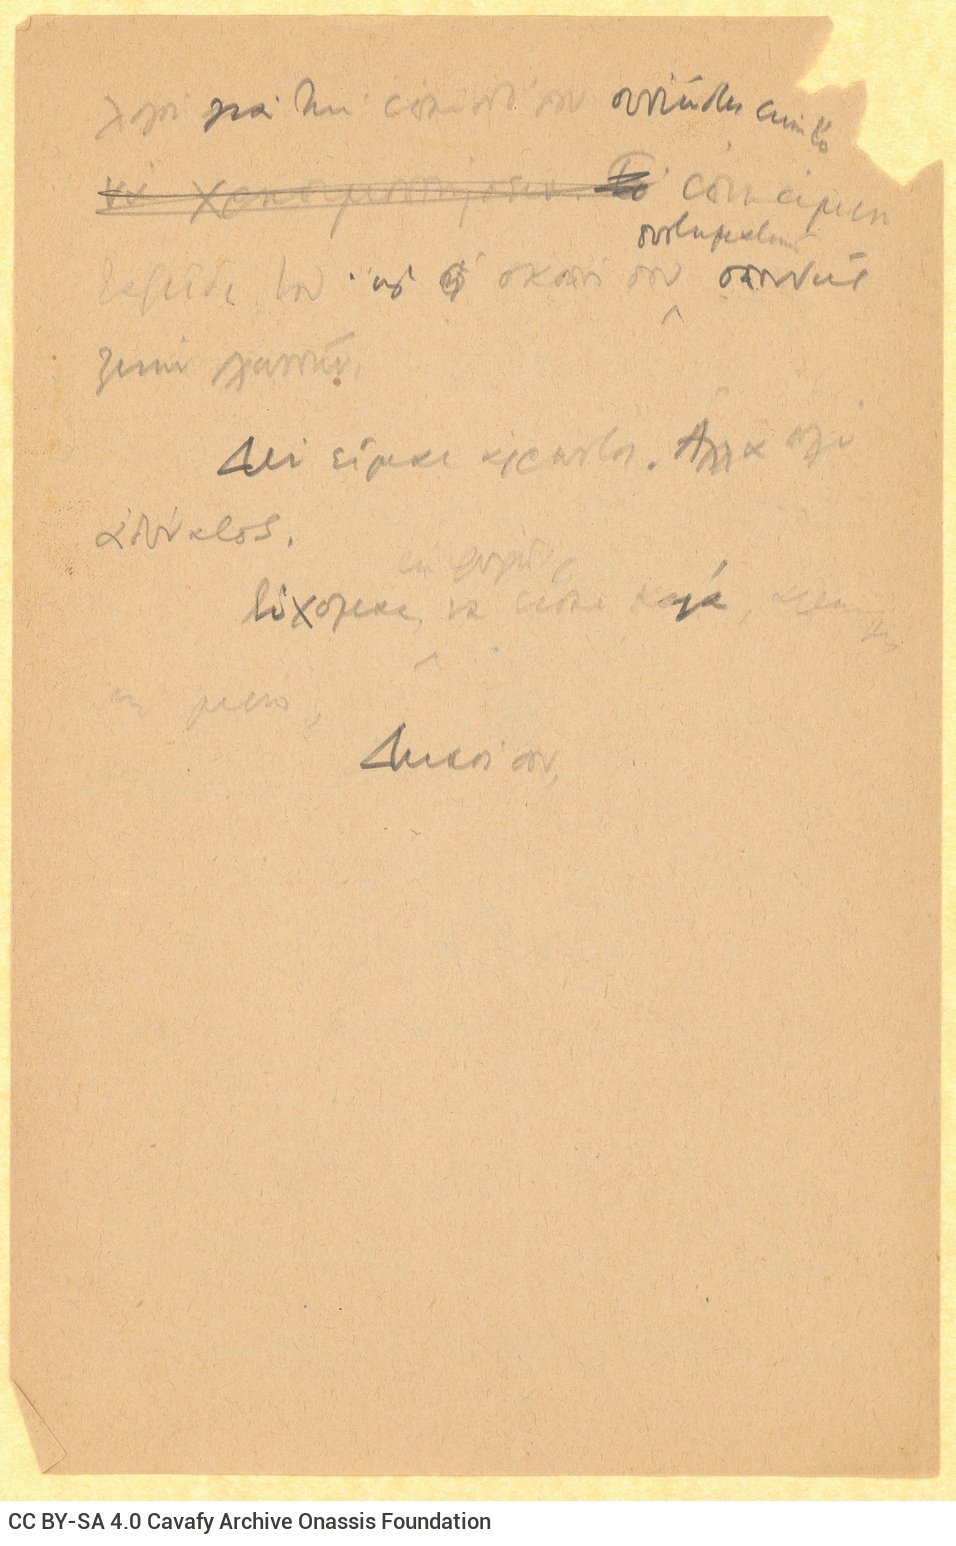 Handwritten draft letter by Cavafy to Alekos [Singopoulo] on both sides of a sheet. Cancellations. The poet advocates for the